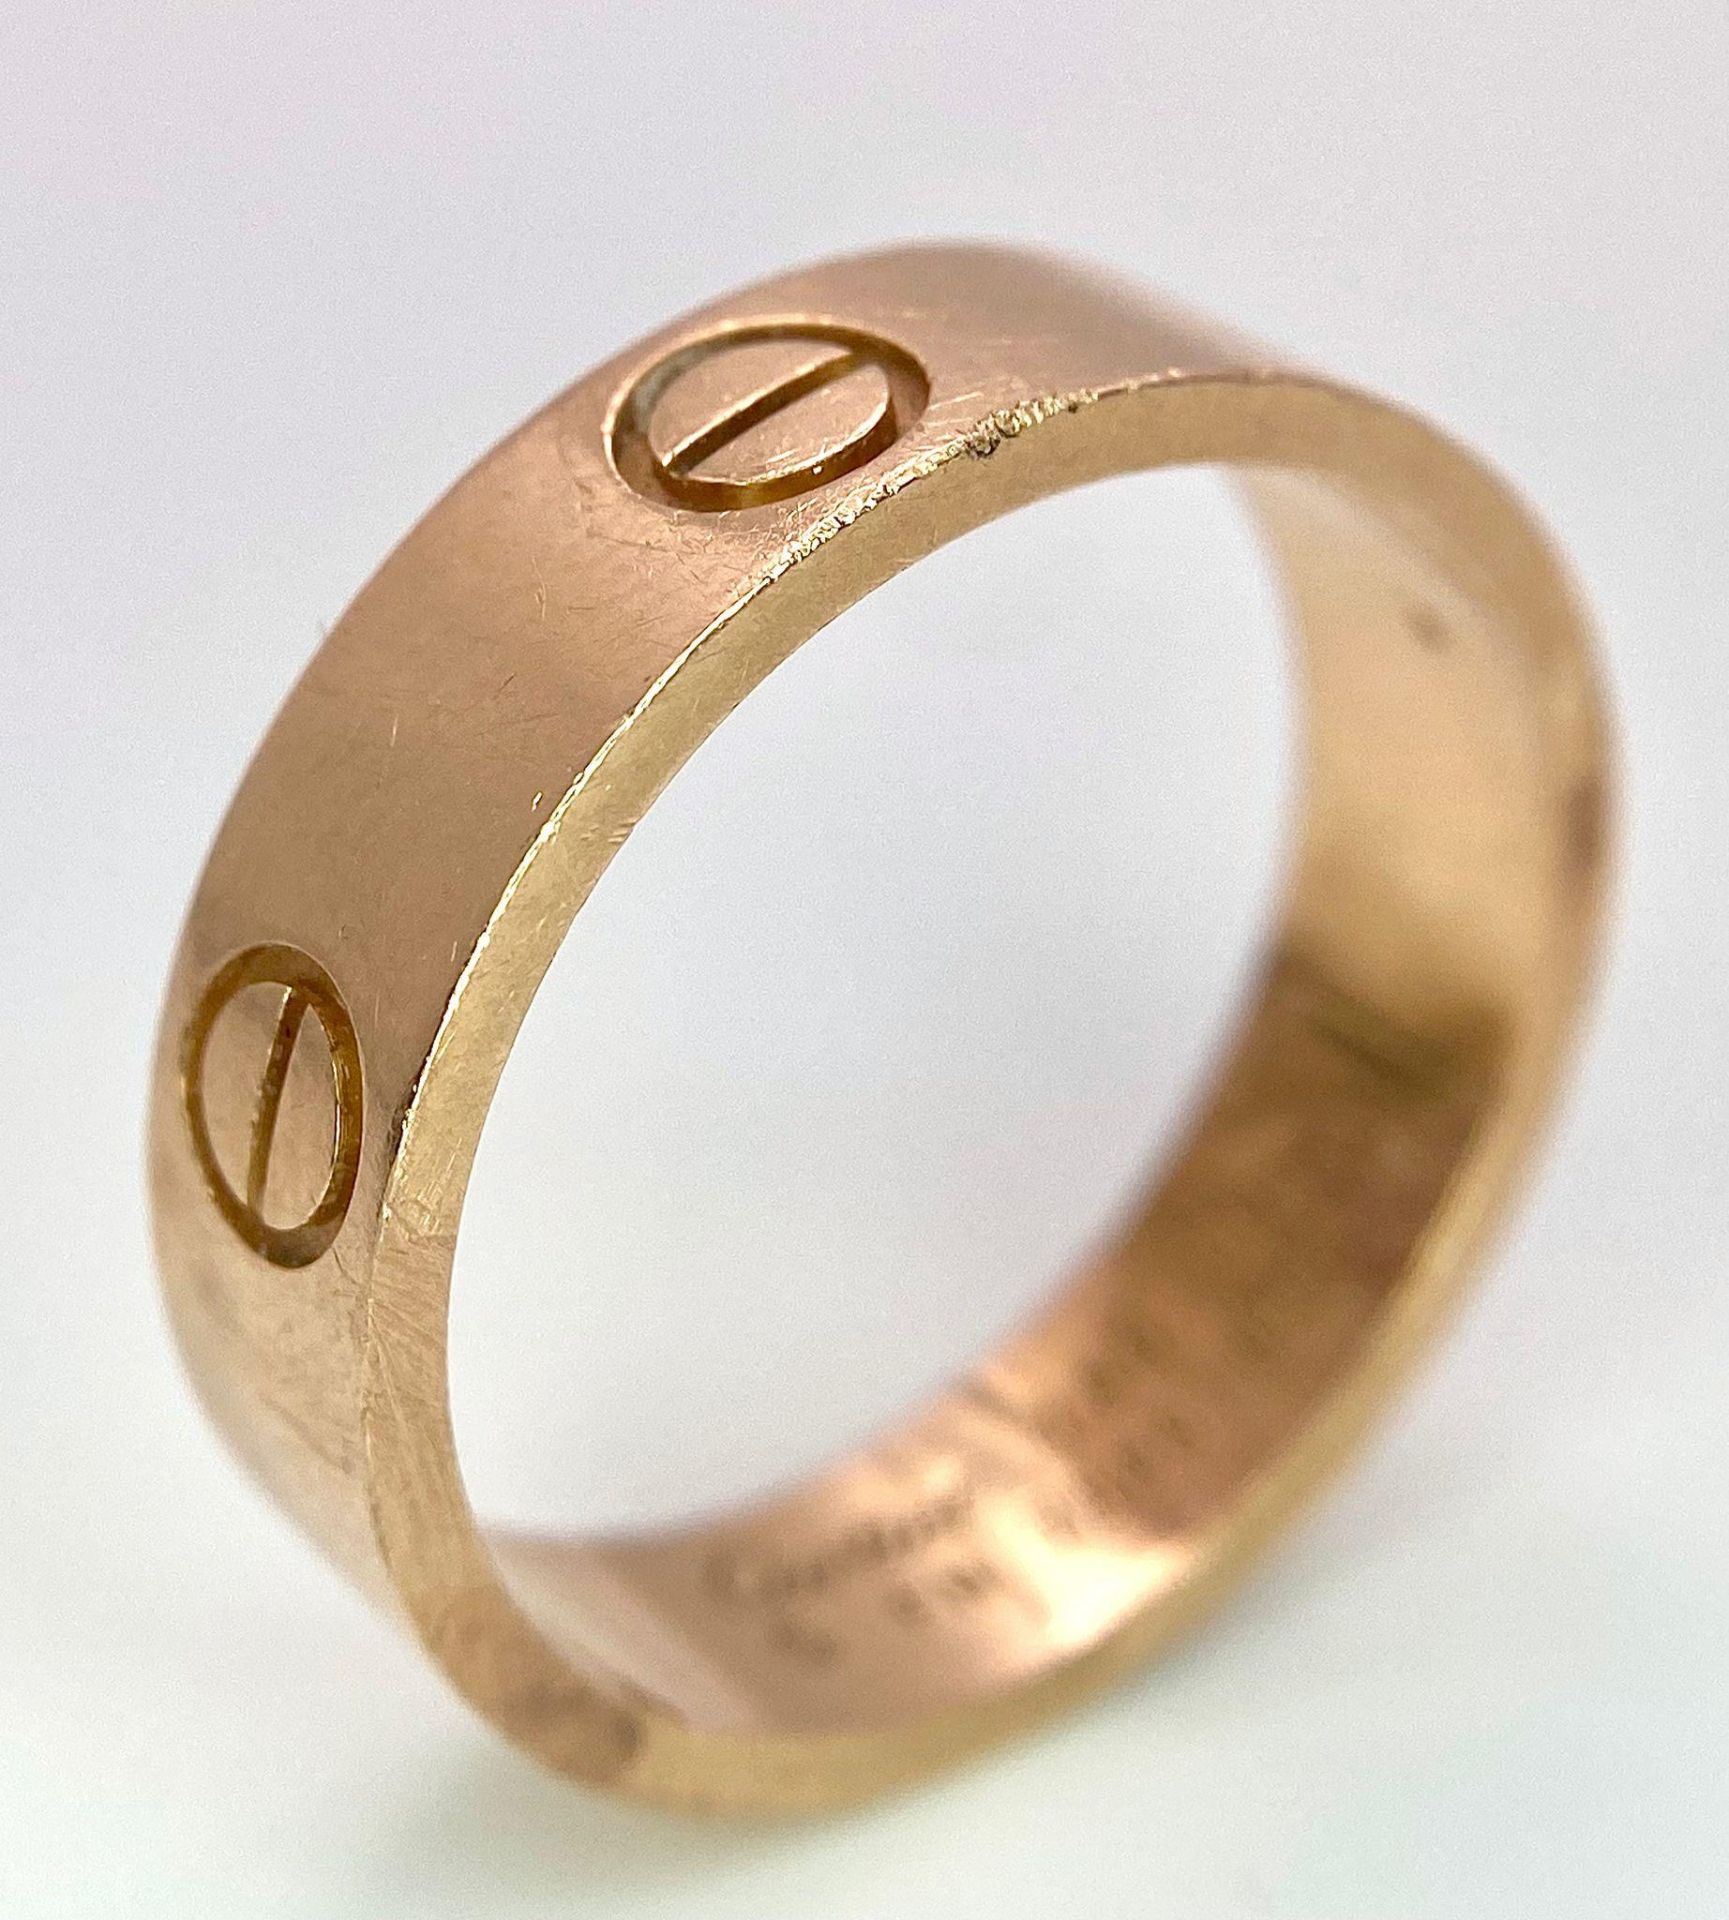 A Cartier 18K Rose Gold Love Band Gents Ring. 6mm width. Cartier hallmarks. Size W. 8.6g weight. - Image 3 of 9